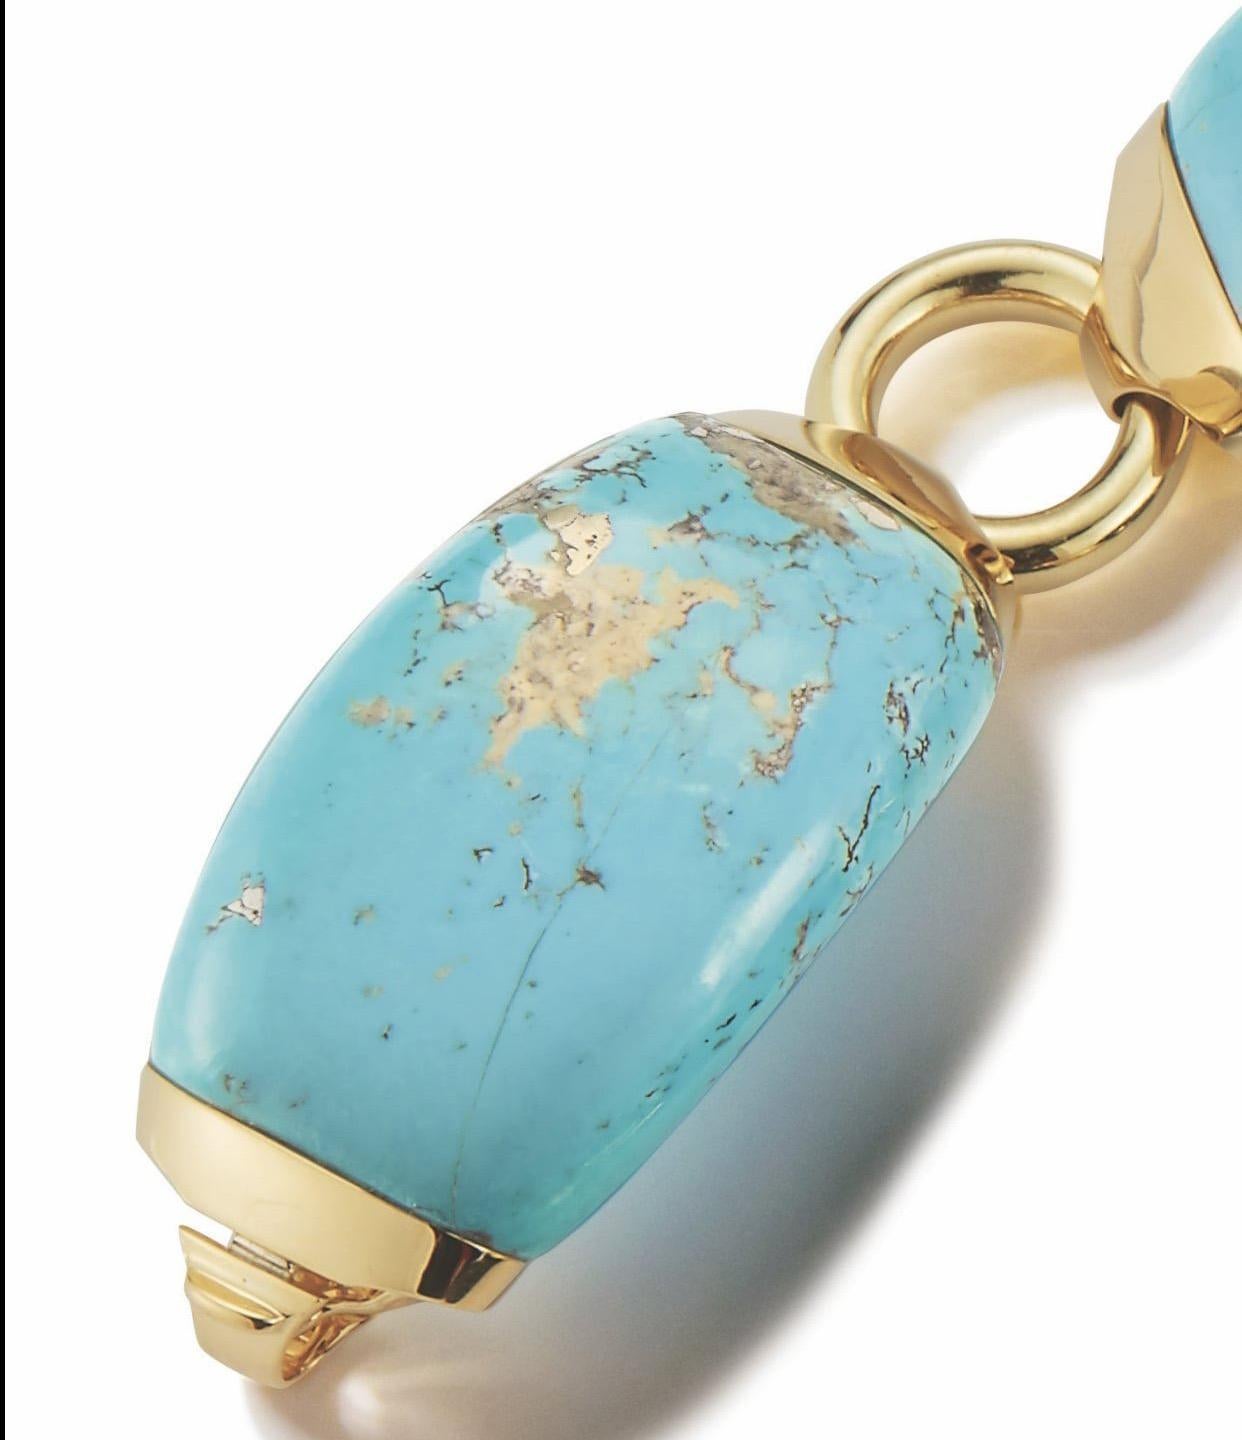 Brand new 18k gold boat link bracelet featuring turquoise. Crafted by Seaman Schepps. Bracelet measures approximately 6 3/4 inches long, links measure 25mm wide. Weight is 92.6 grams. Marked Seaman Schepps 750 246196.